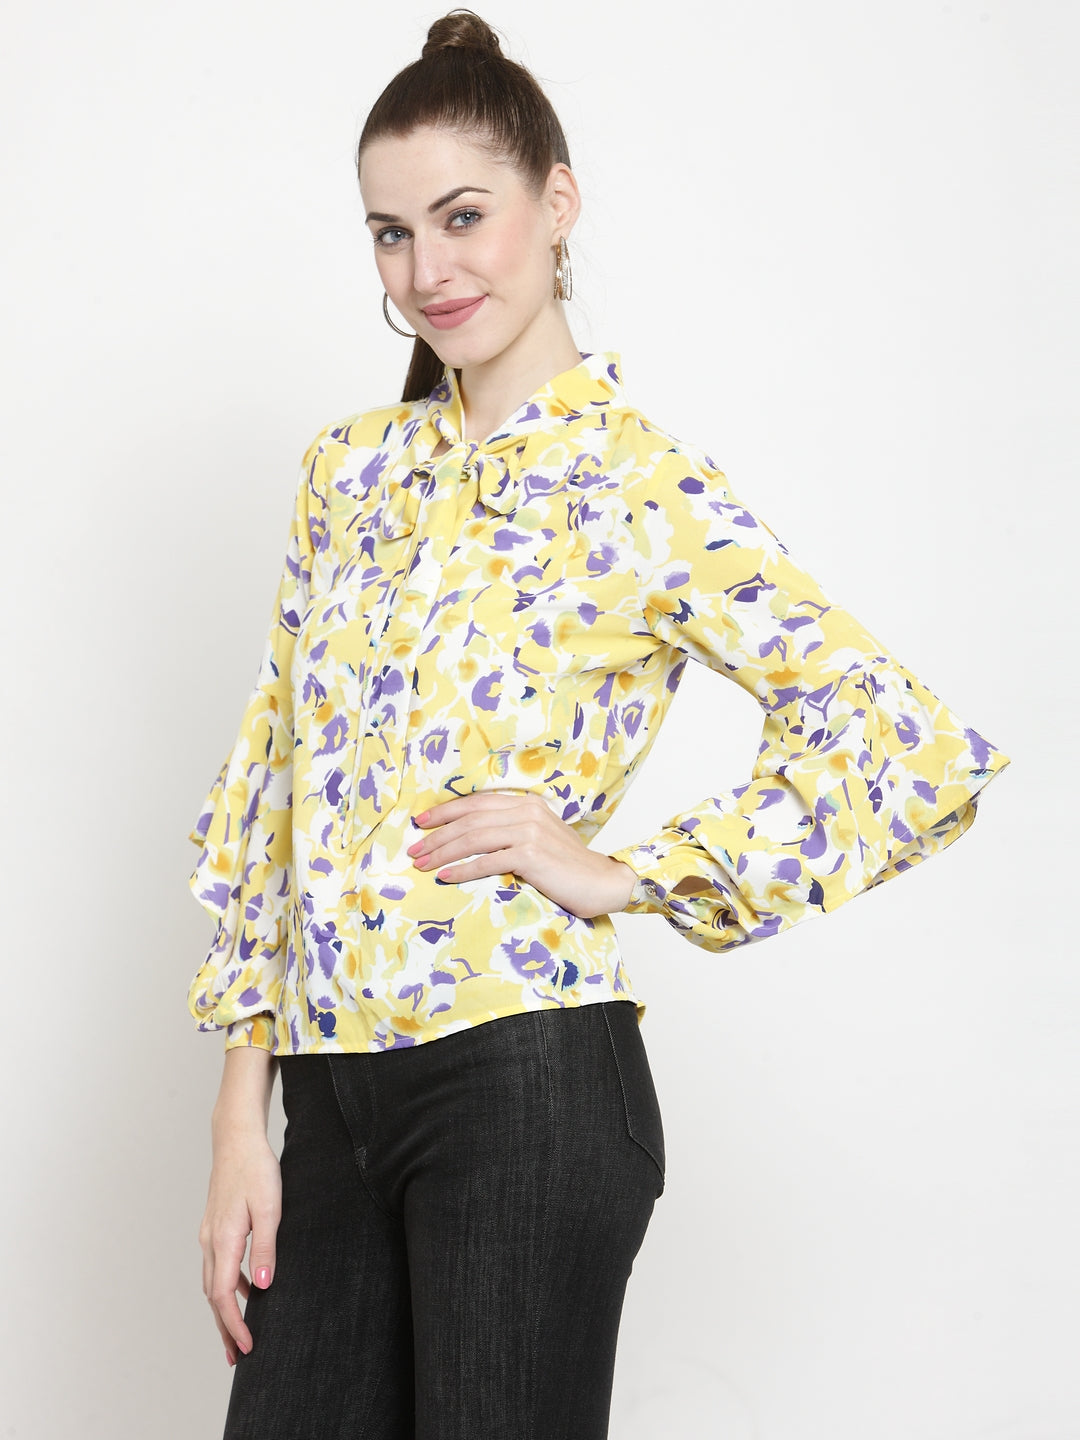 Printed Blouse With Cut Out Sleeve